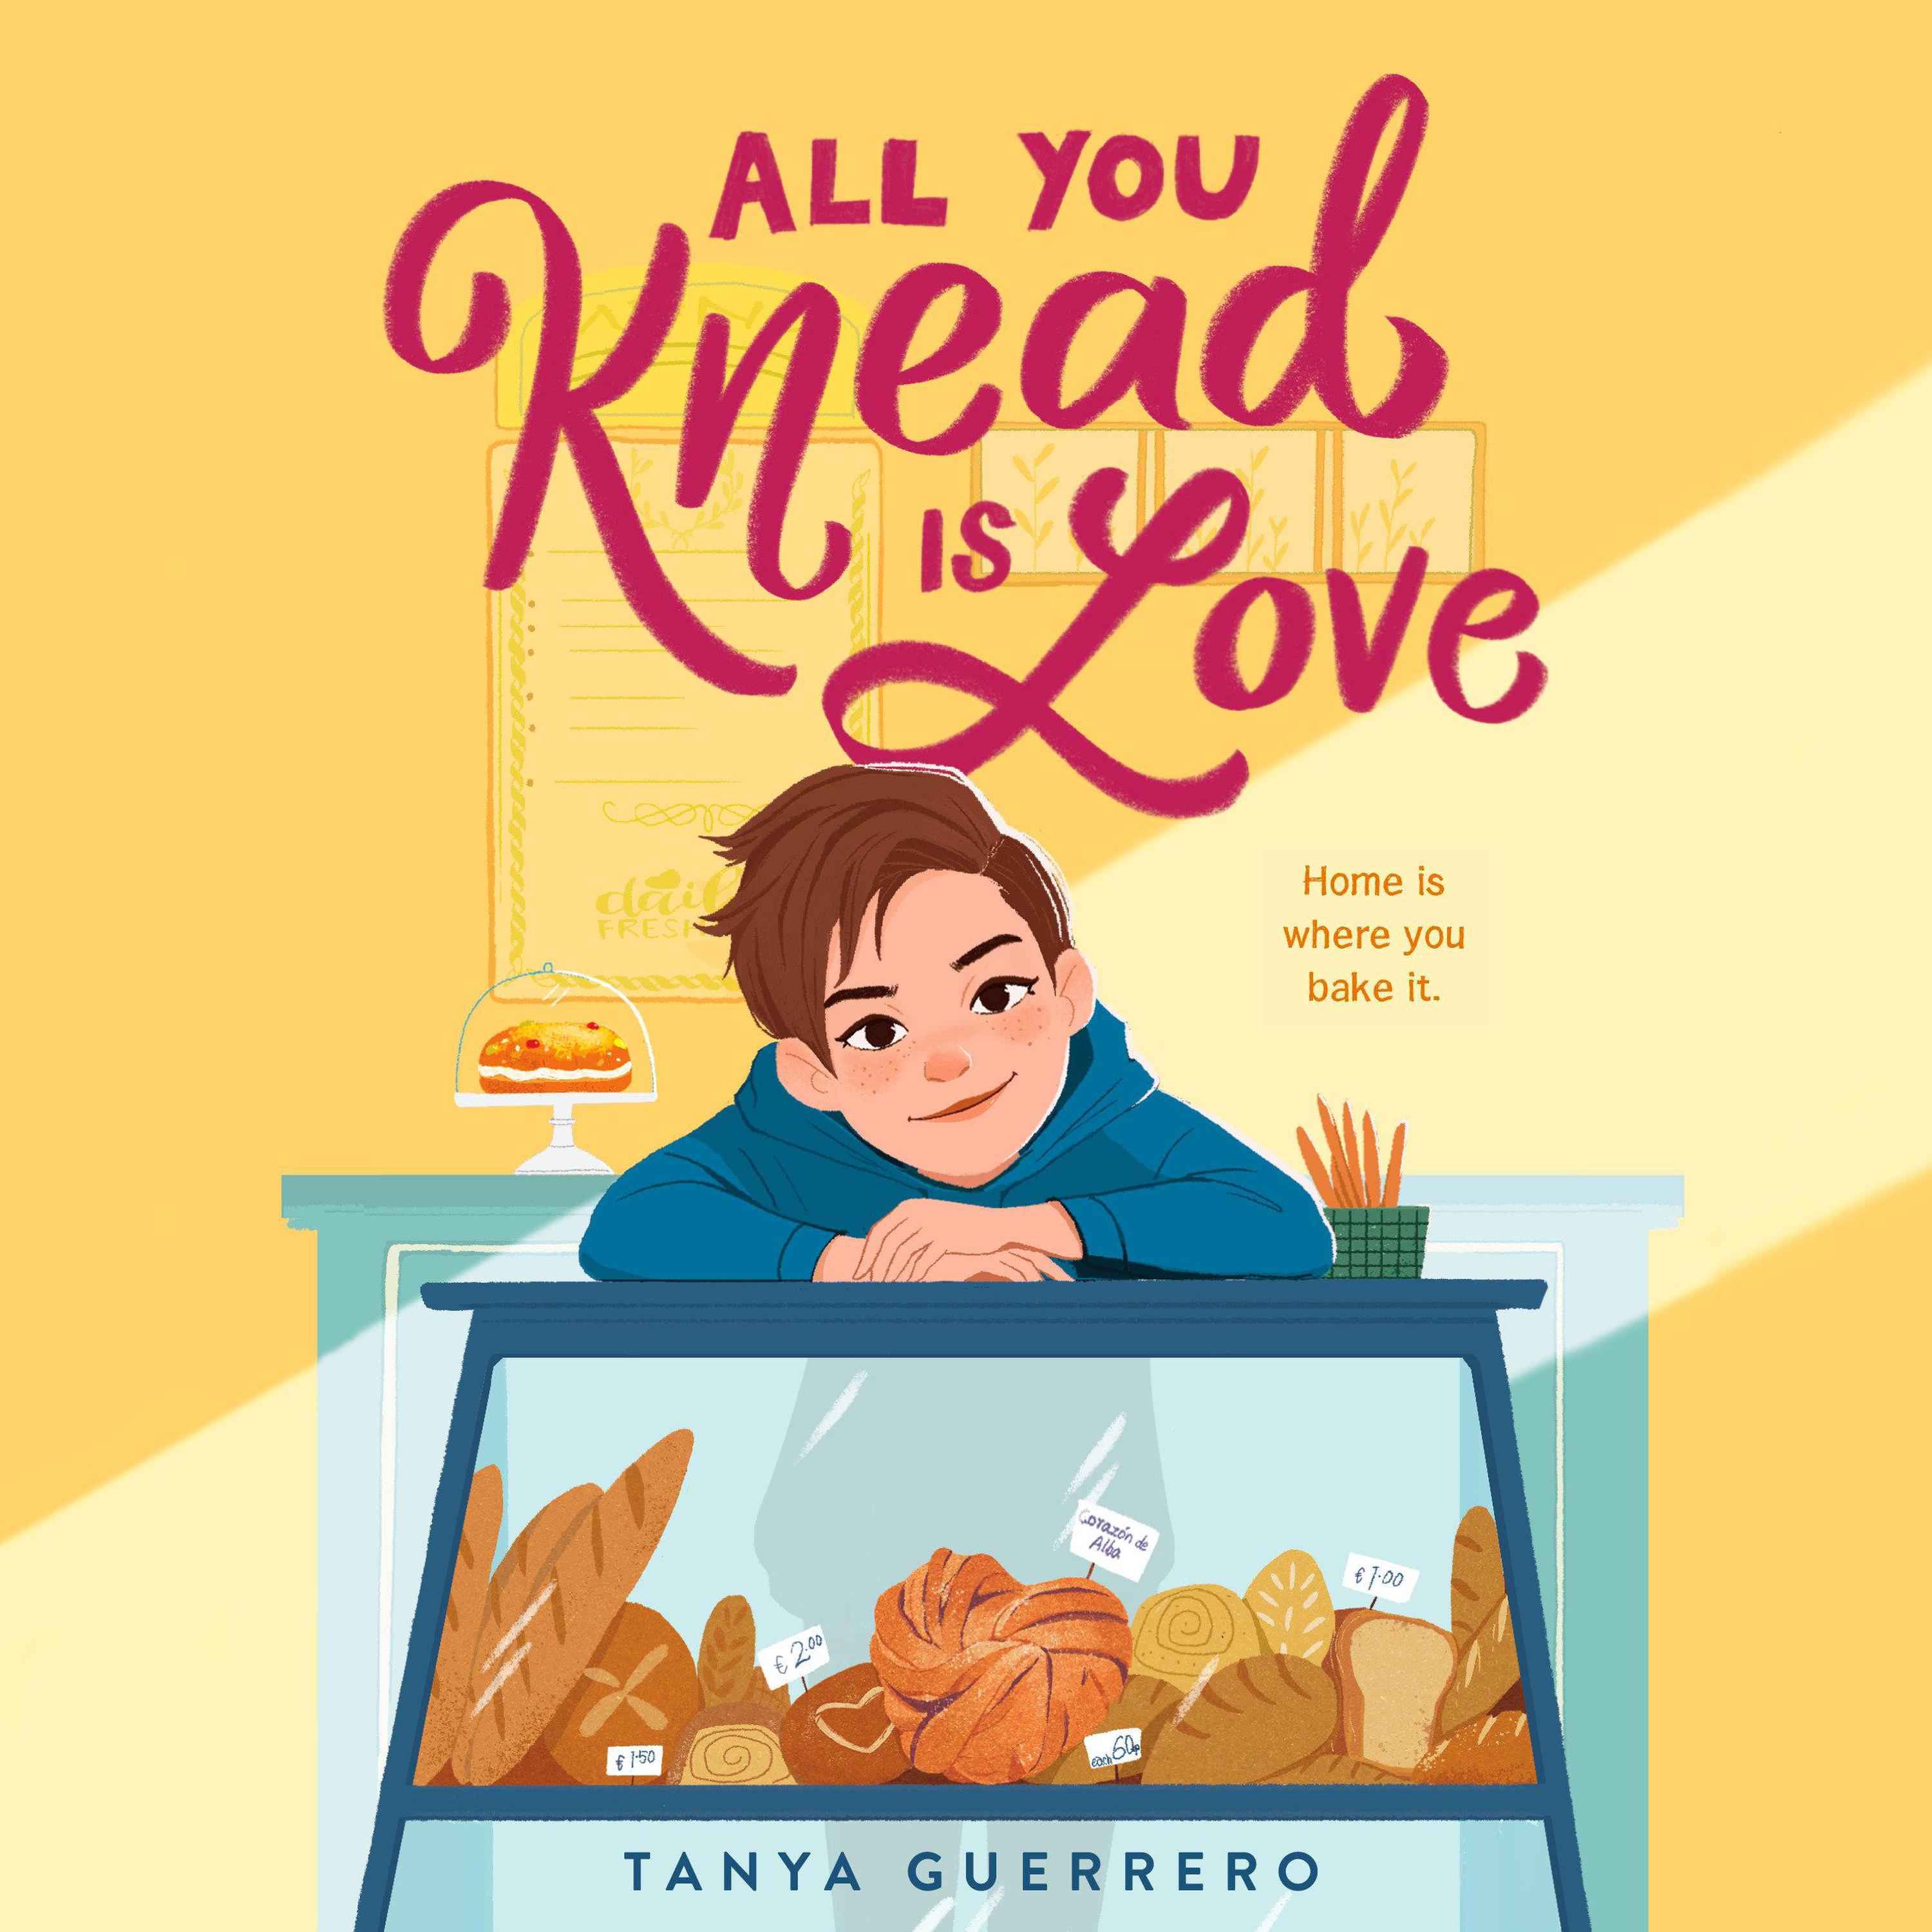 download all you knead is love audiobook